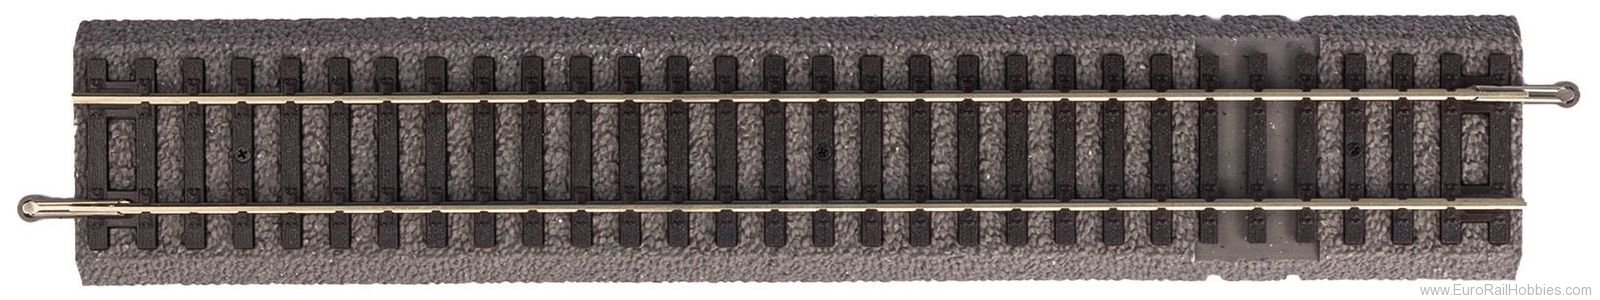 Piko 55406 PIKO A-track with roadbed, Straight track 231